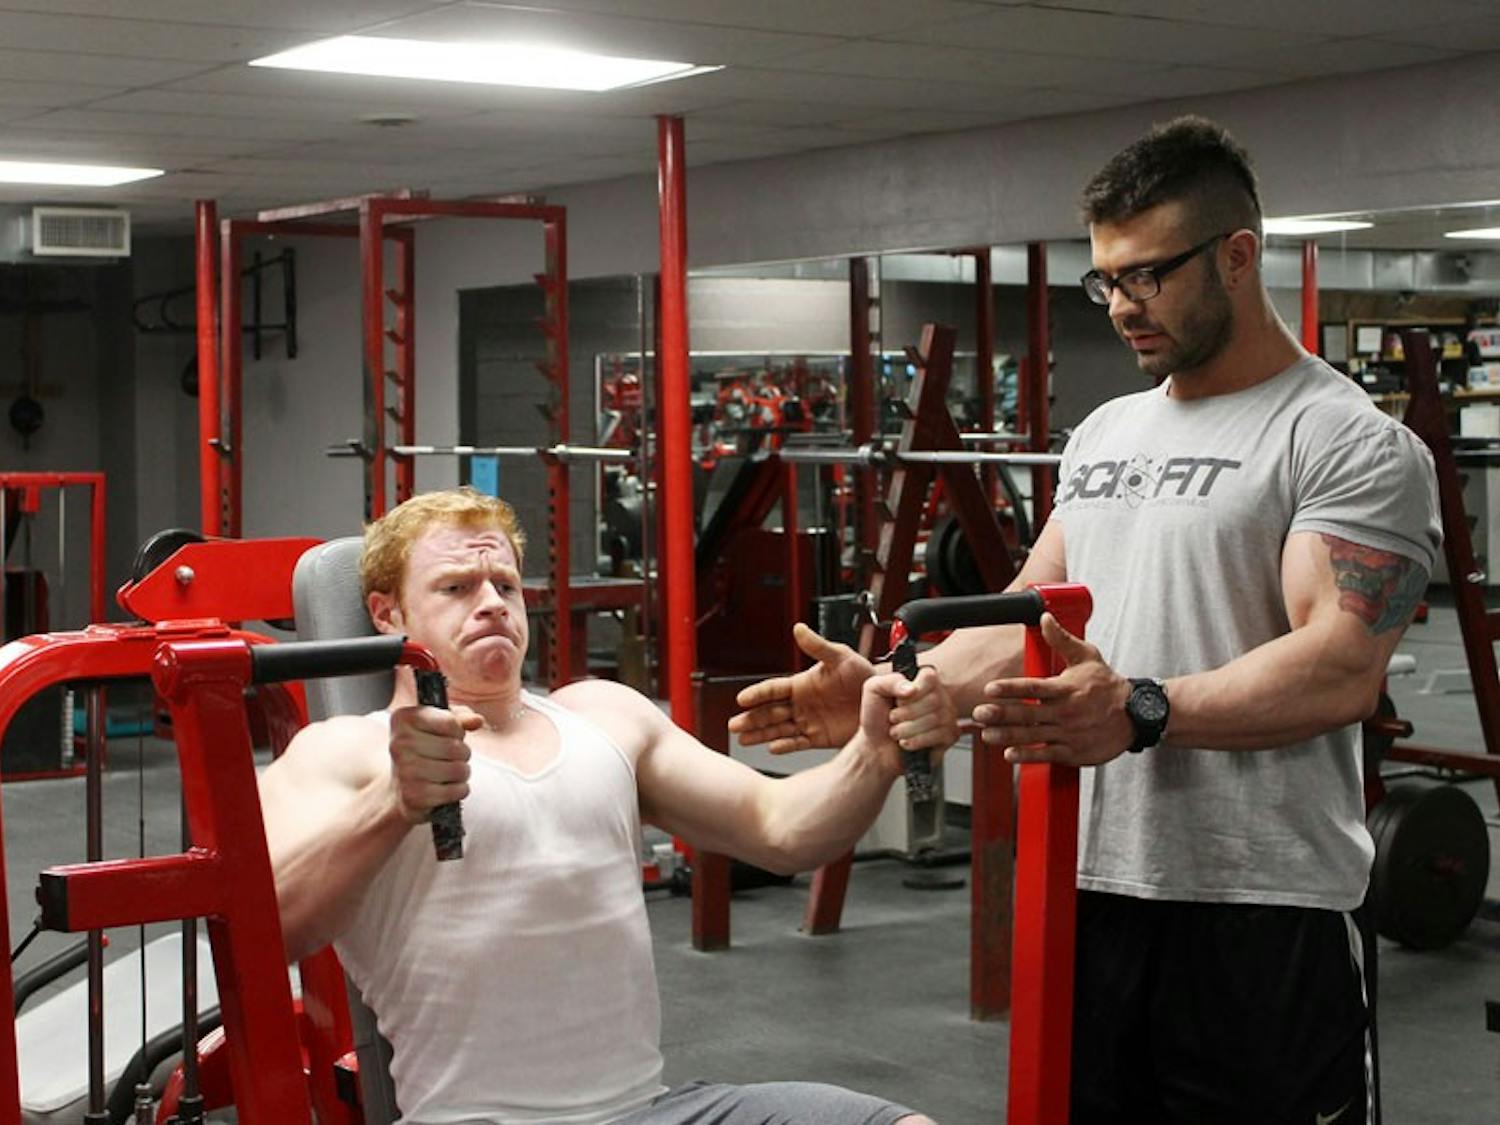 UB student Jon Jeziorowski works out with fitness trainer Scott Quinn. The two are training for the Mr./Ms. Buffalo bodybuilding competition in March.